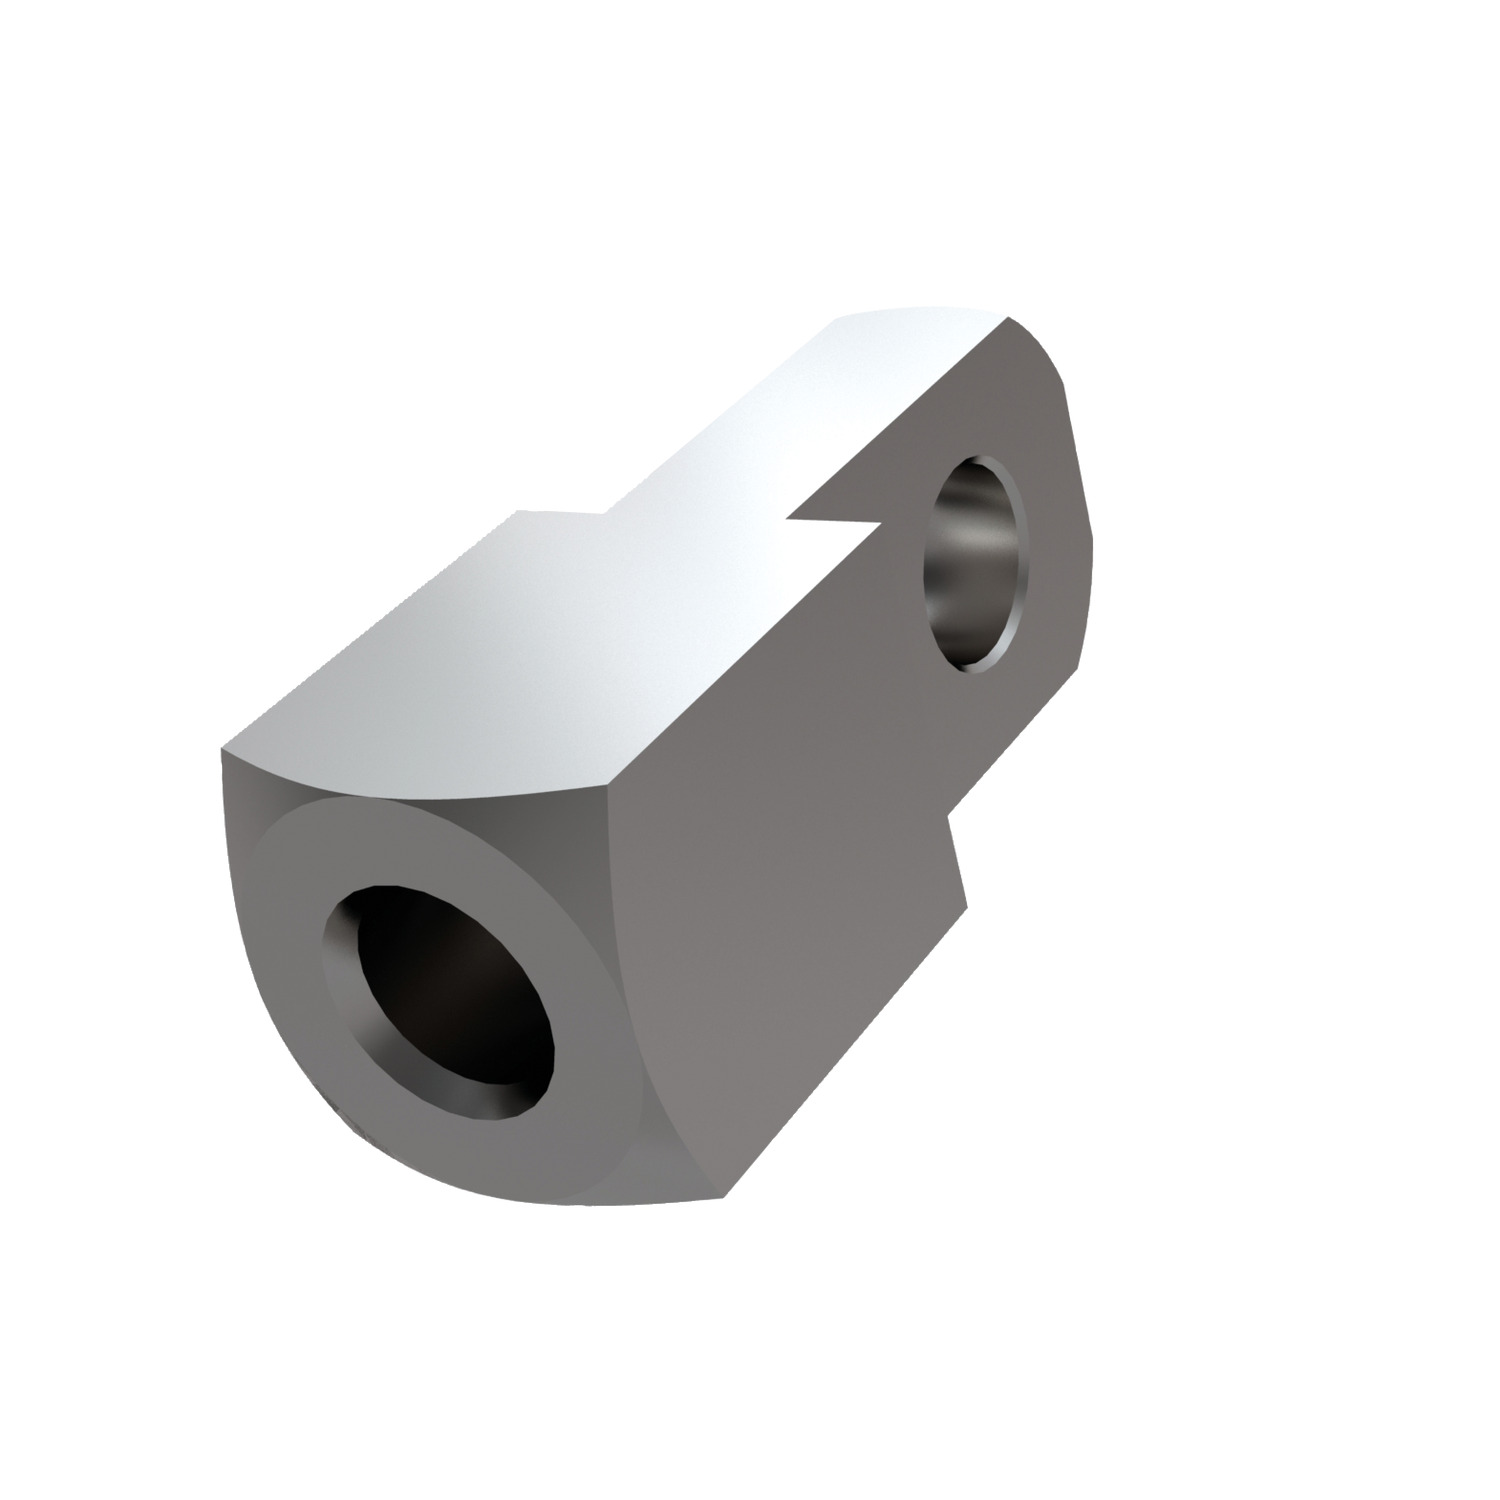 Stainless Mating Piece for Clevis Joints Thin end of mating piece is designed to fit in between forks of clevis joint.